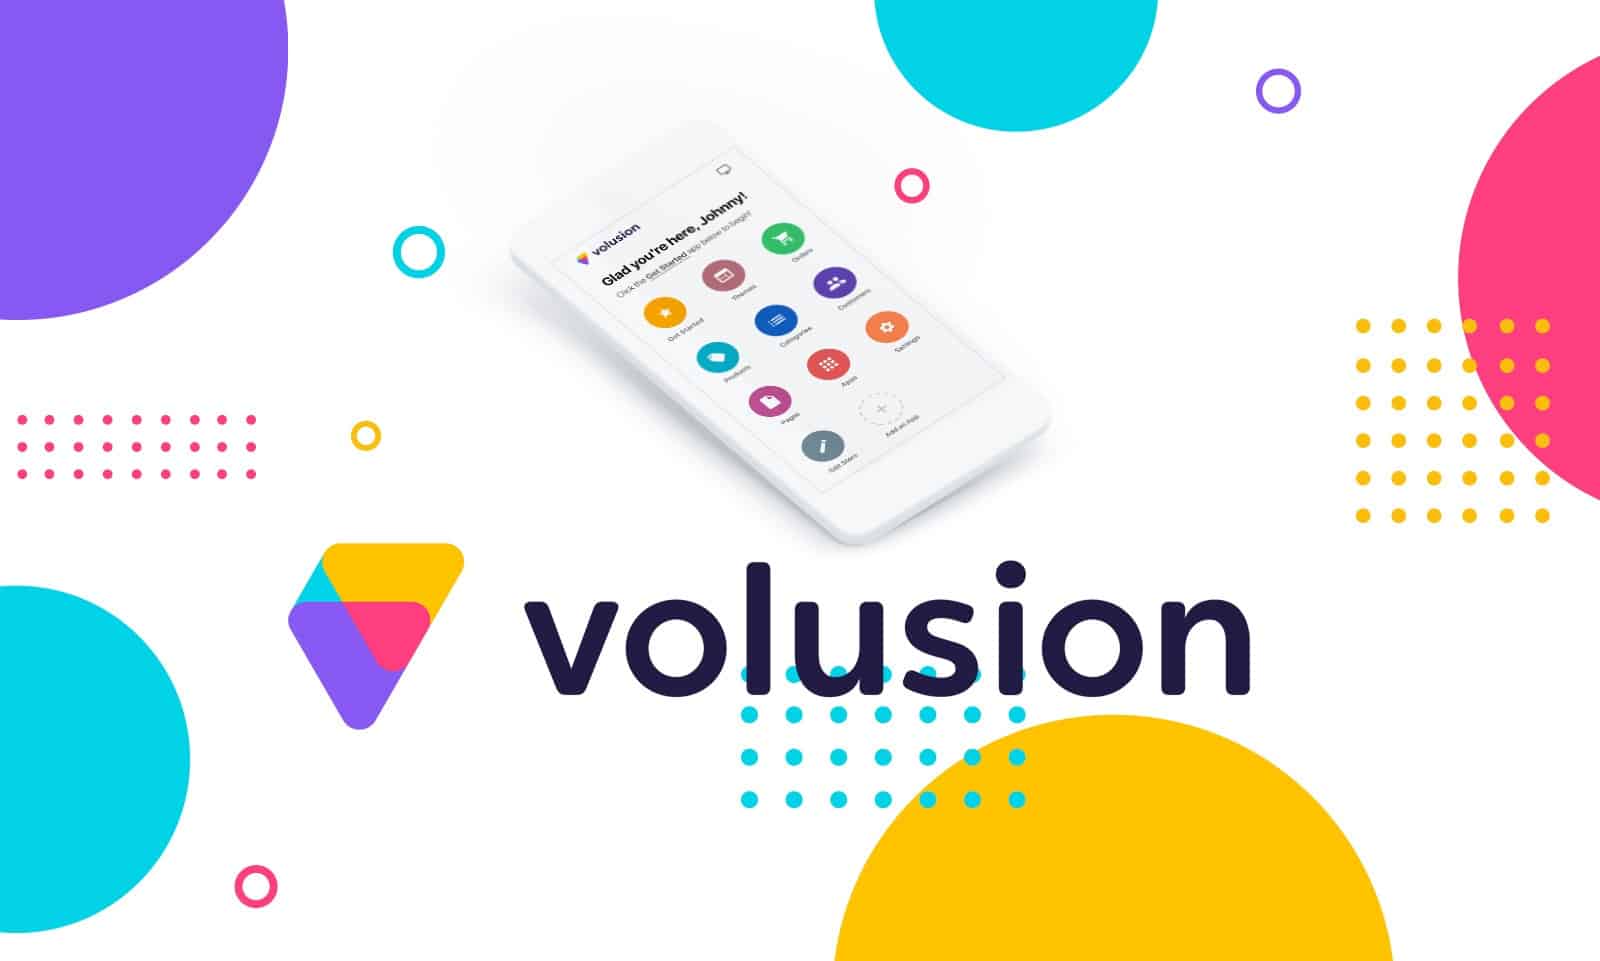 Volusion Review Should You Use It For Your Business?